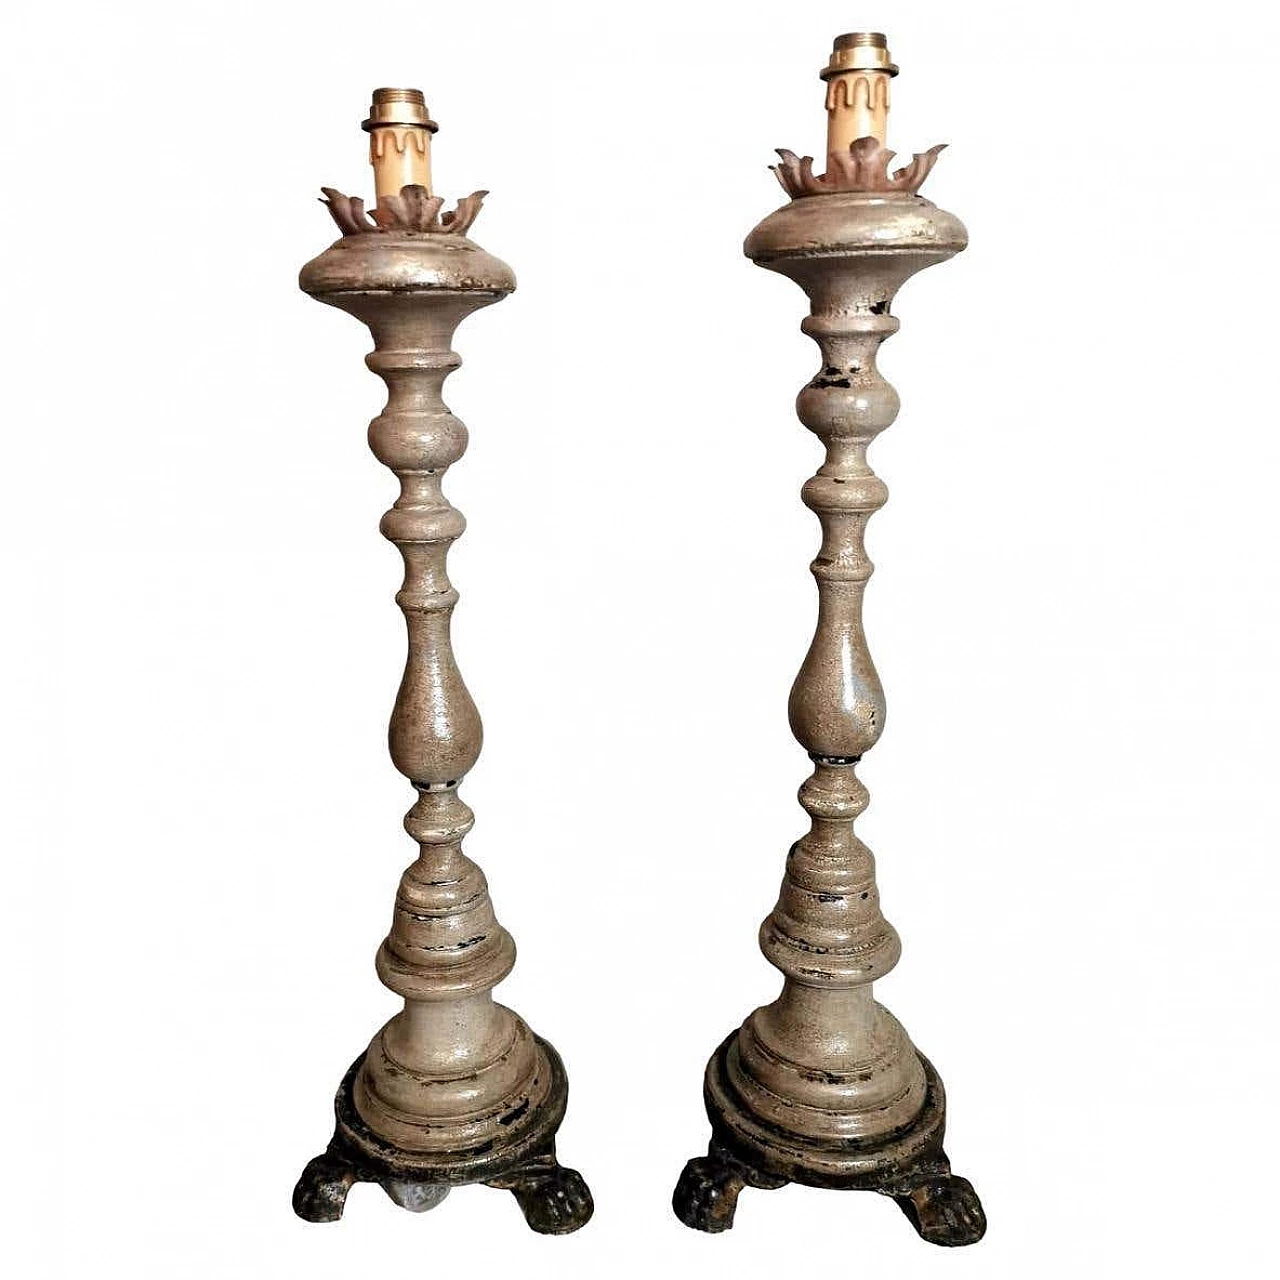 Pair of turned wooden altar candlesticks, 19th century 17